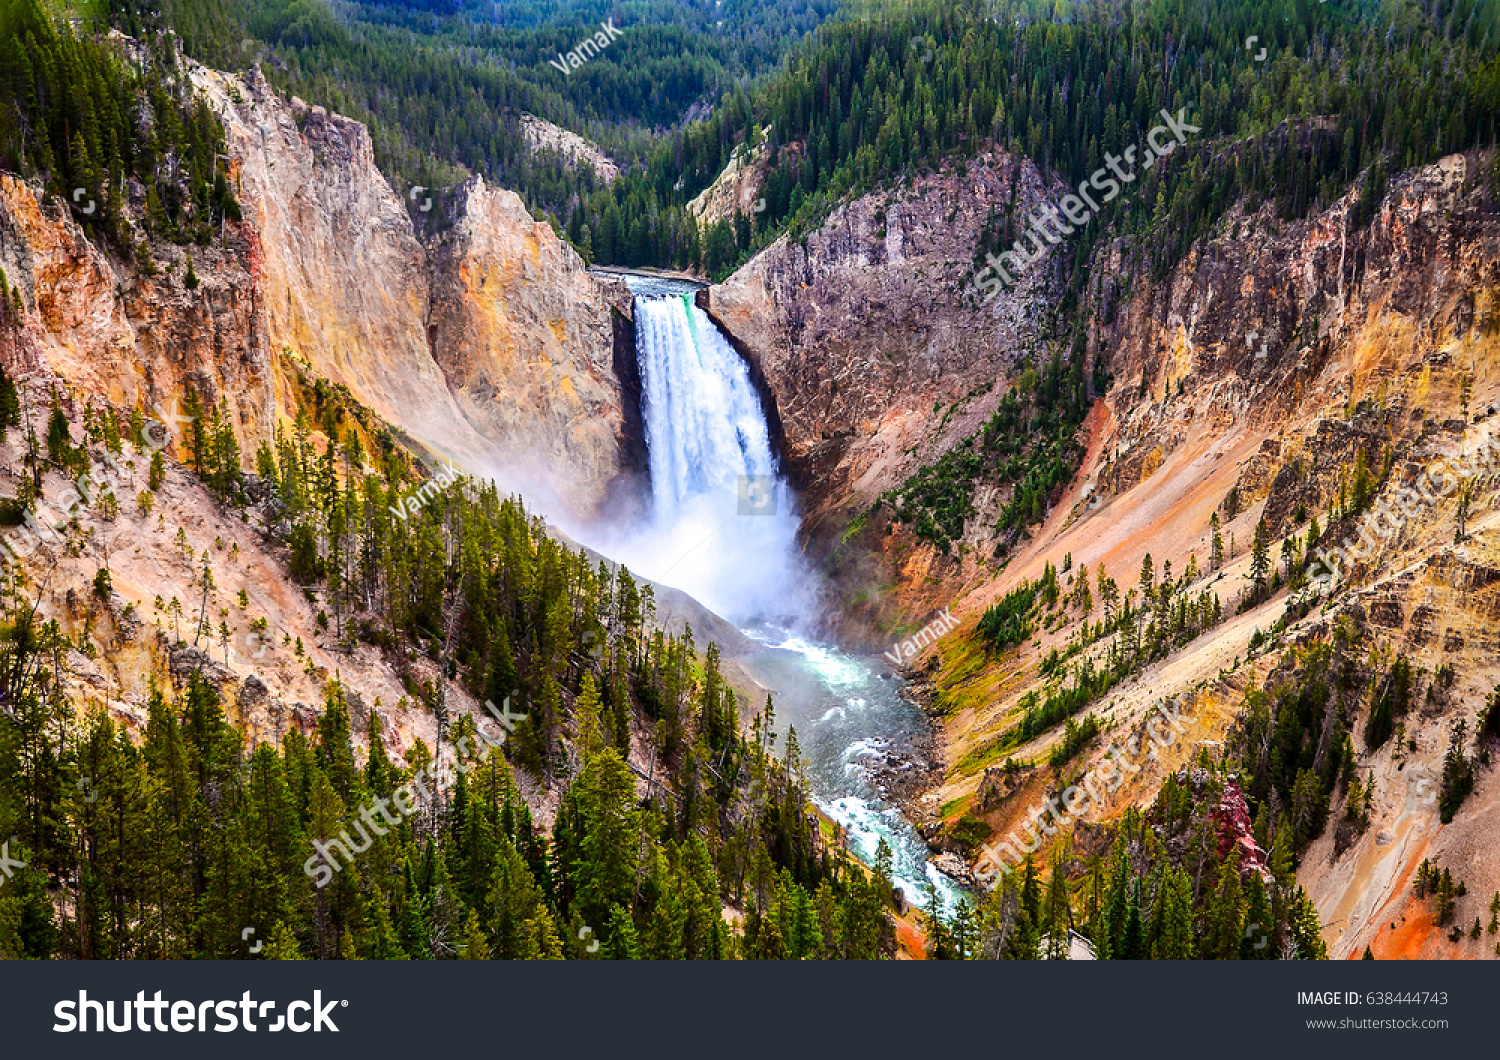 Yellowstone National Park mountain waterfall valley landscape #638444743